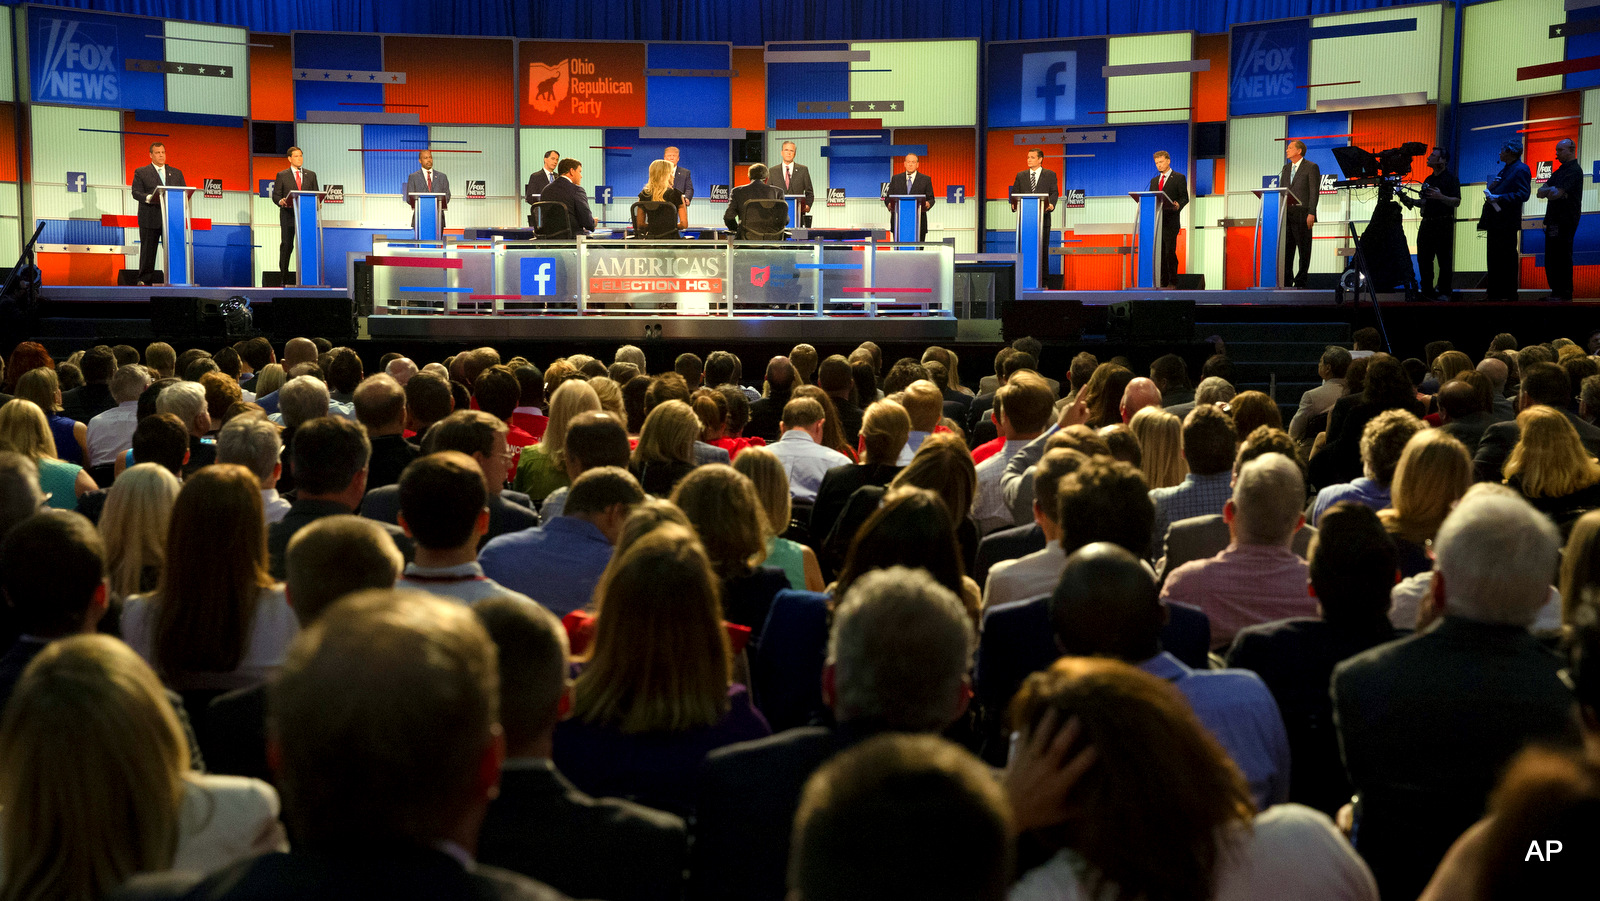 Republican presidential candidates take the stage for the first Republican presidential debate at the Quicken Loans Arena Thursday, Aug. 6, 2015, in Cleveland.